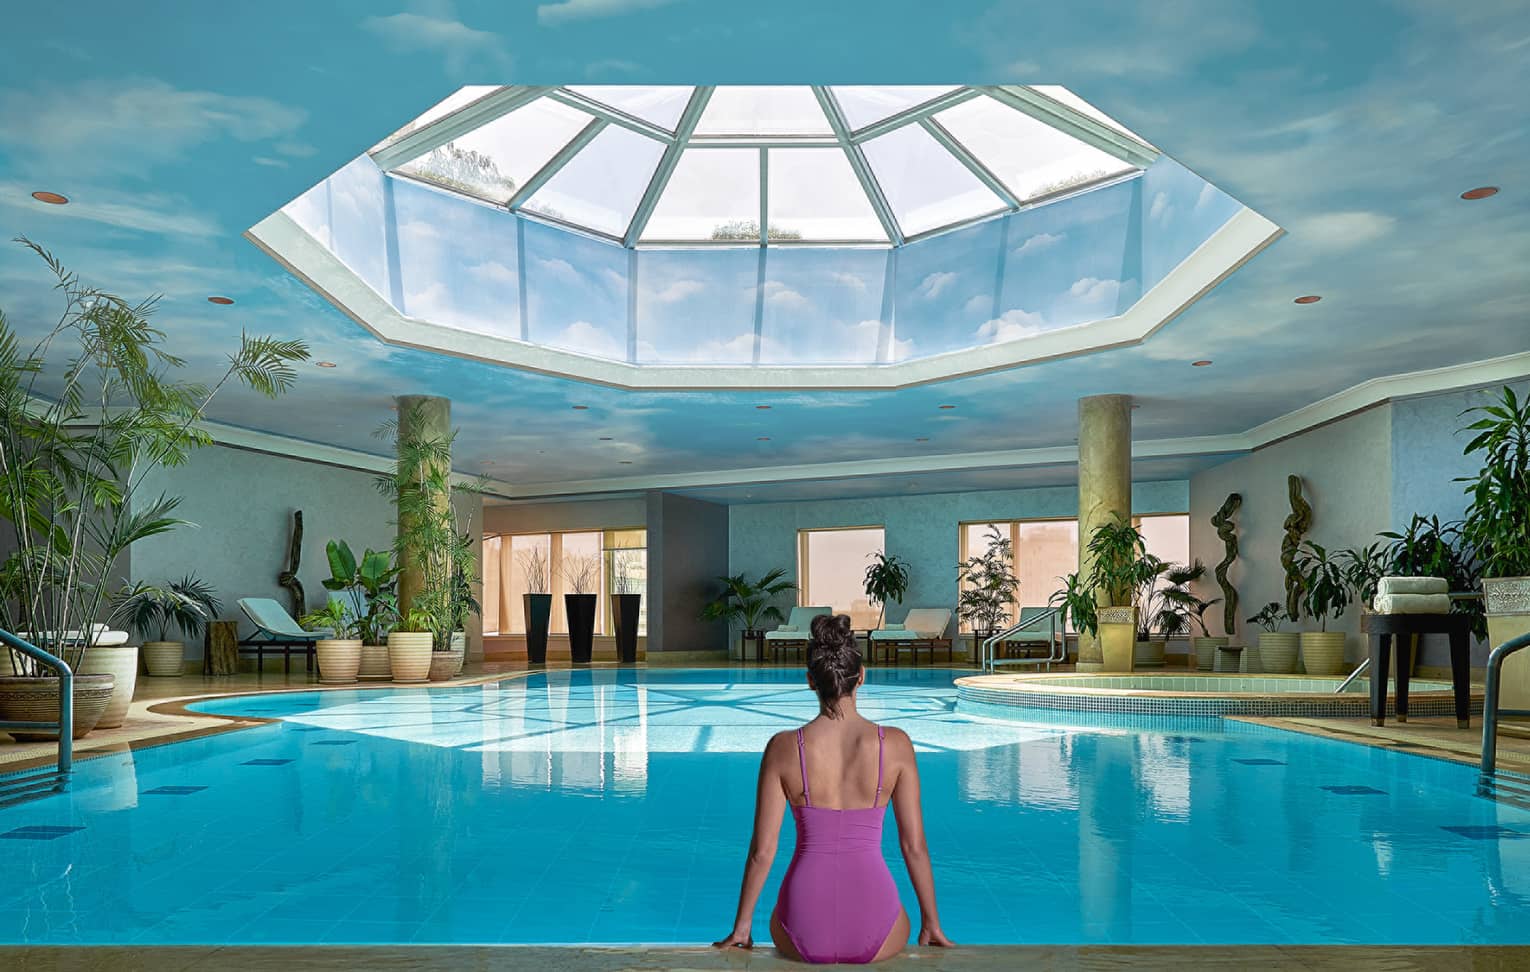 Woman in swimsuit seated on edge of indoor pool with blue ceiling and skylight above